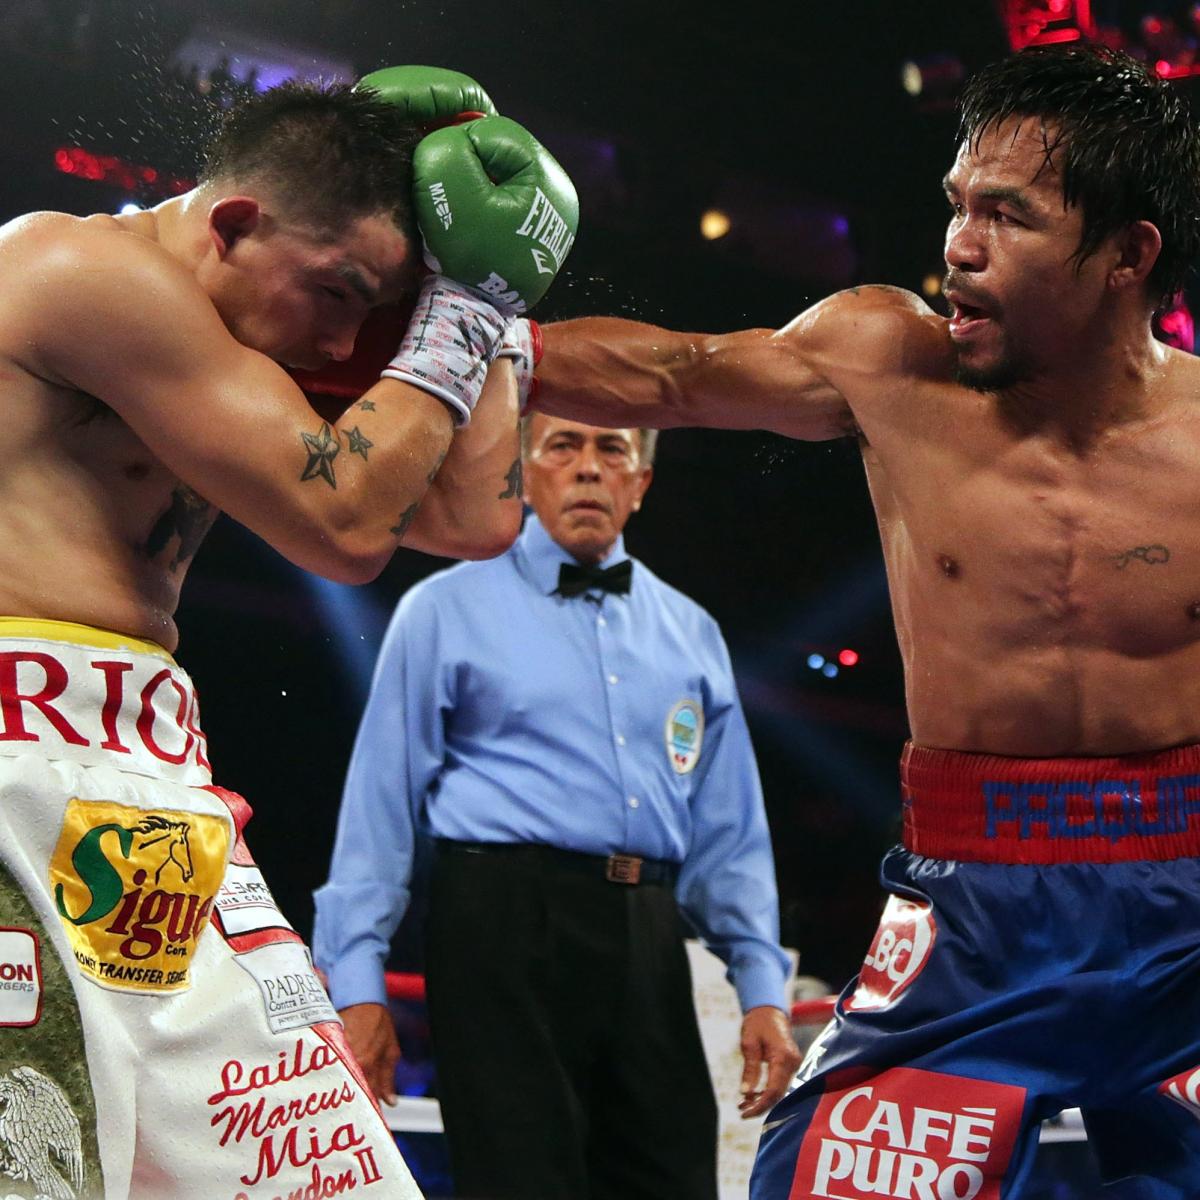 Pacquiao vs. Rios Results: Pacman Returns to Form with Dominant Win over Rios